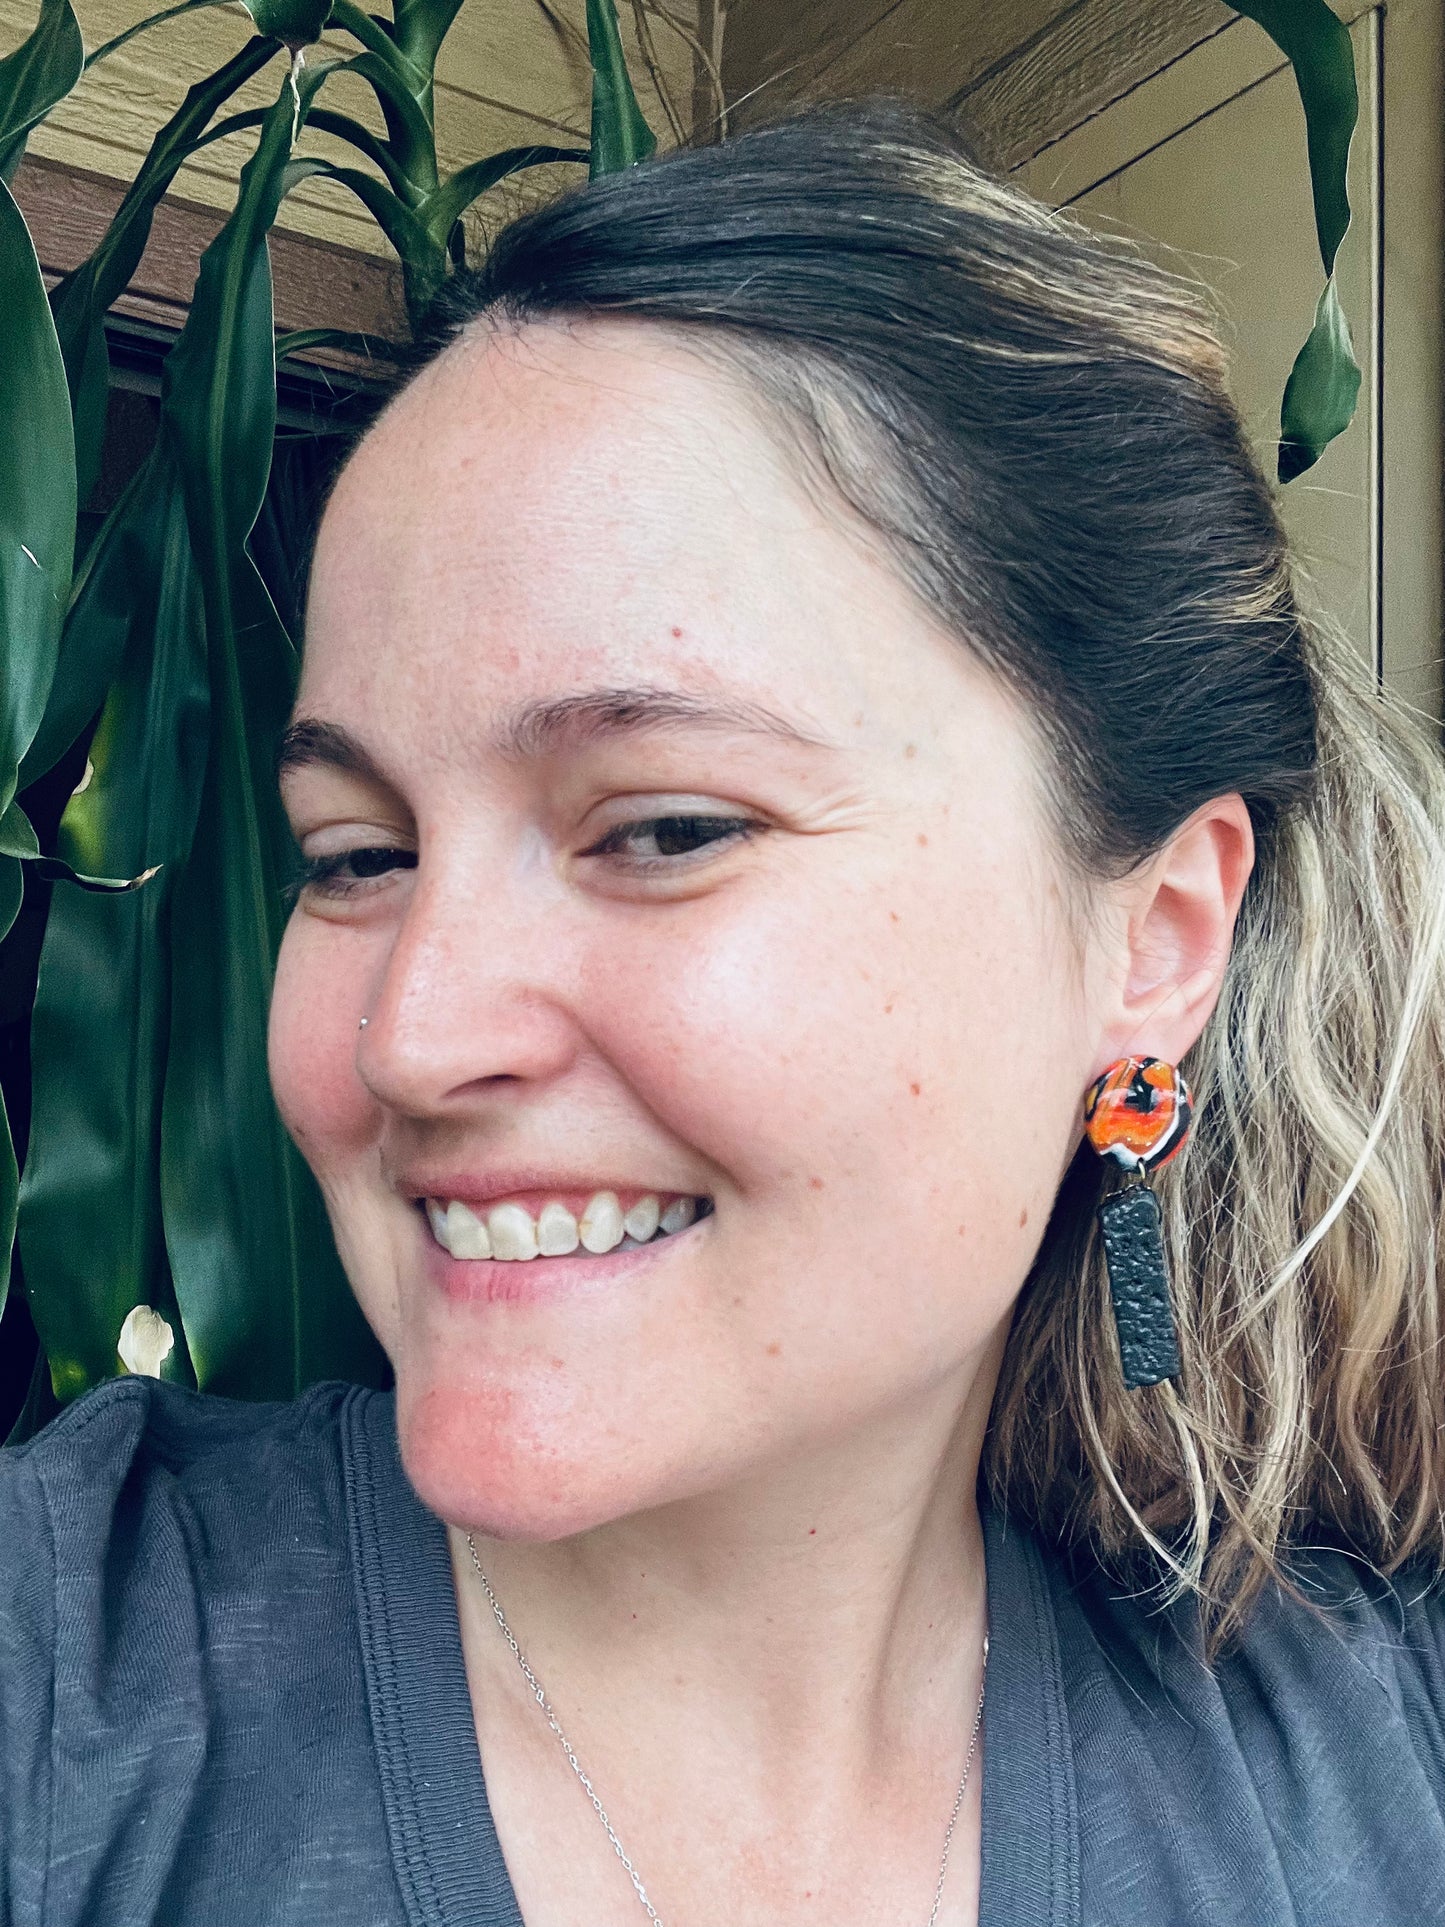 Harness the power of lava stone with these earrings. Representing strength and renewal, lava stone allows you to reconnect with nature, find inner calm, and express your true self.